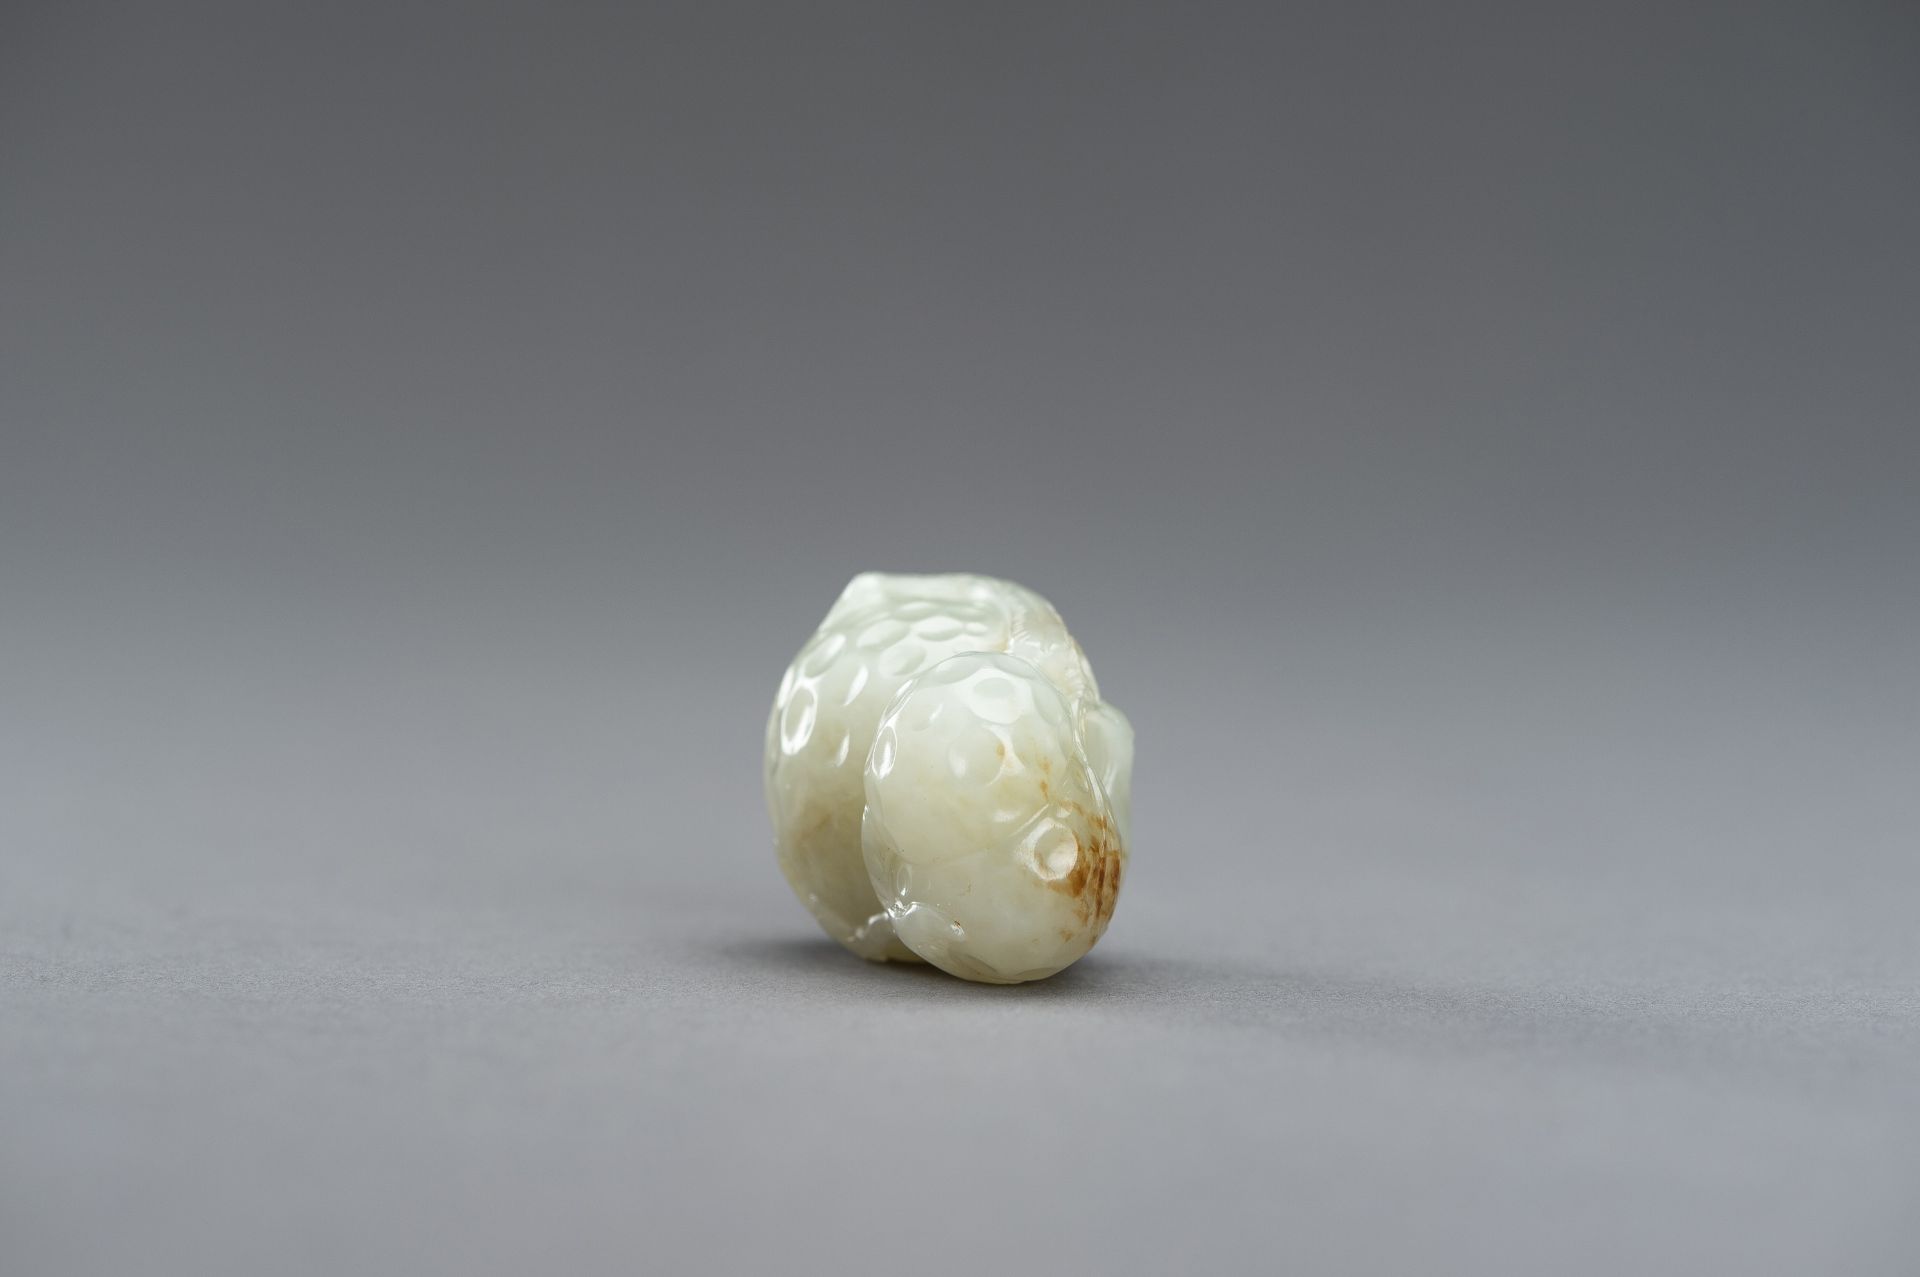 A CELADON JADE PENDANT OF A LYCHEE WITH BIRDS, 1920s - Image 5 of 9